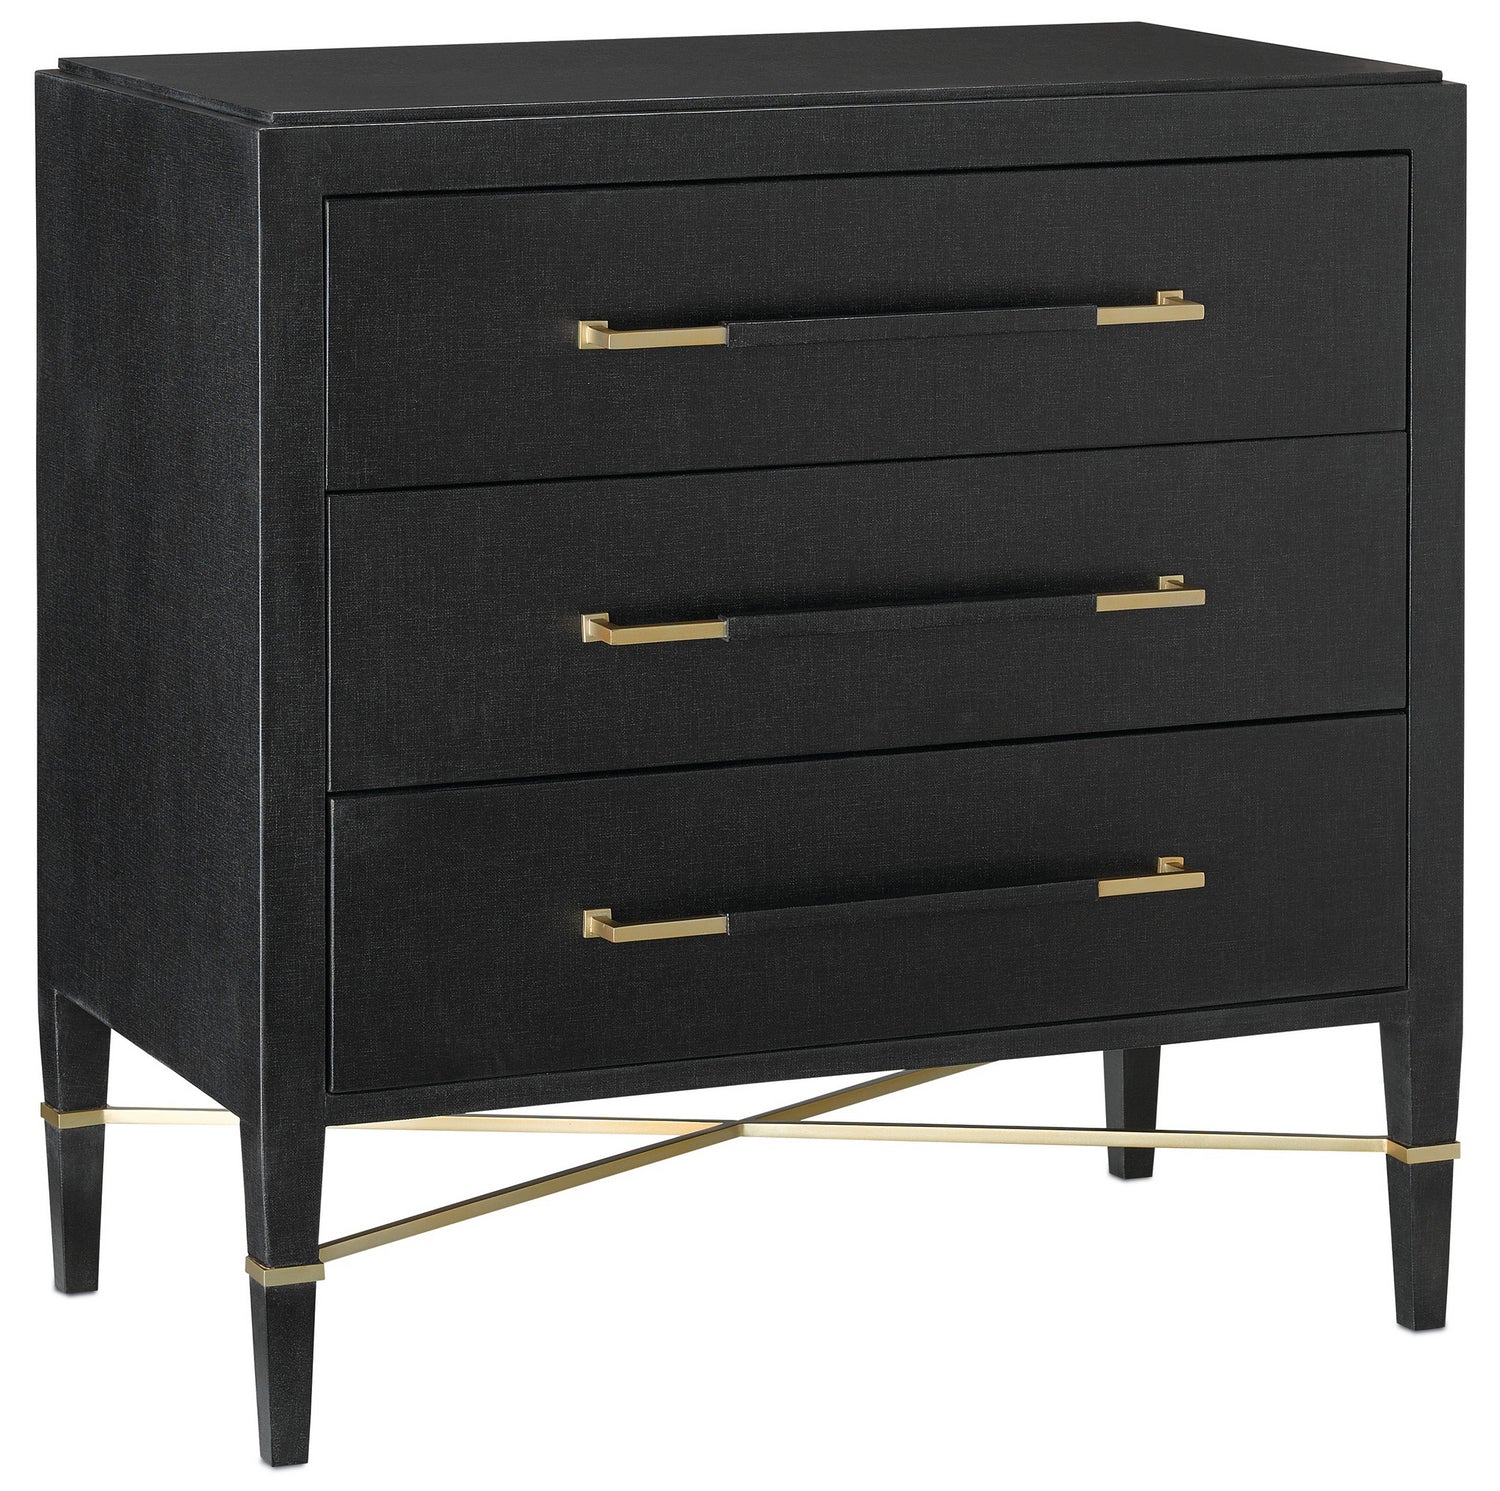 Chest from the Verona collection in Black Lacquered Linen/Champagne finish